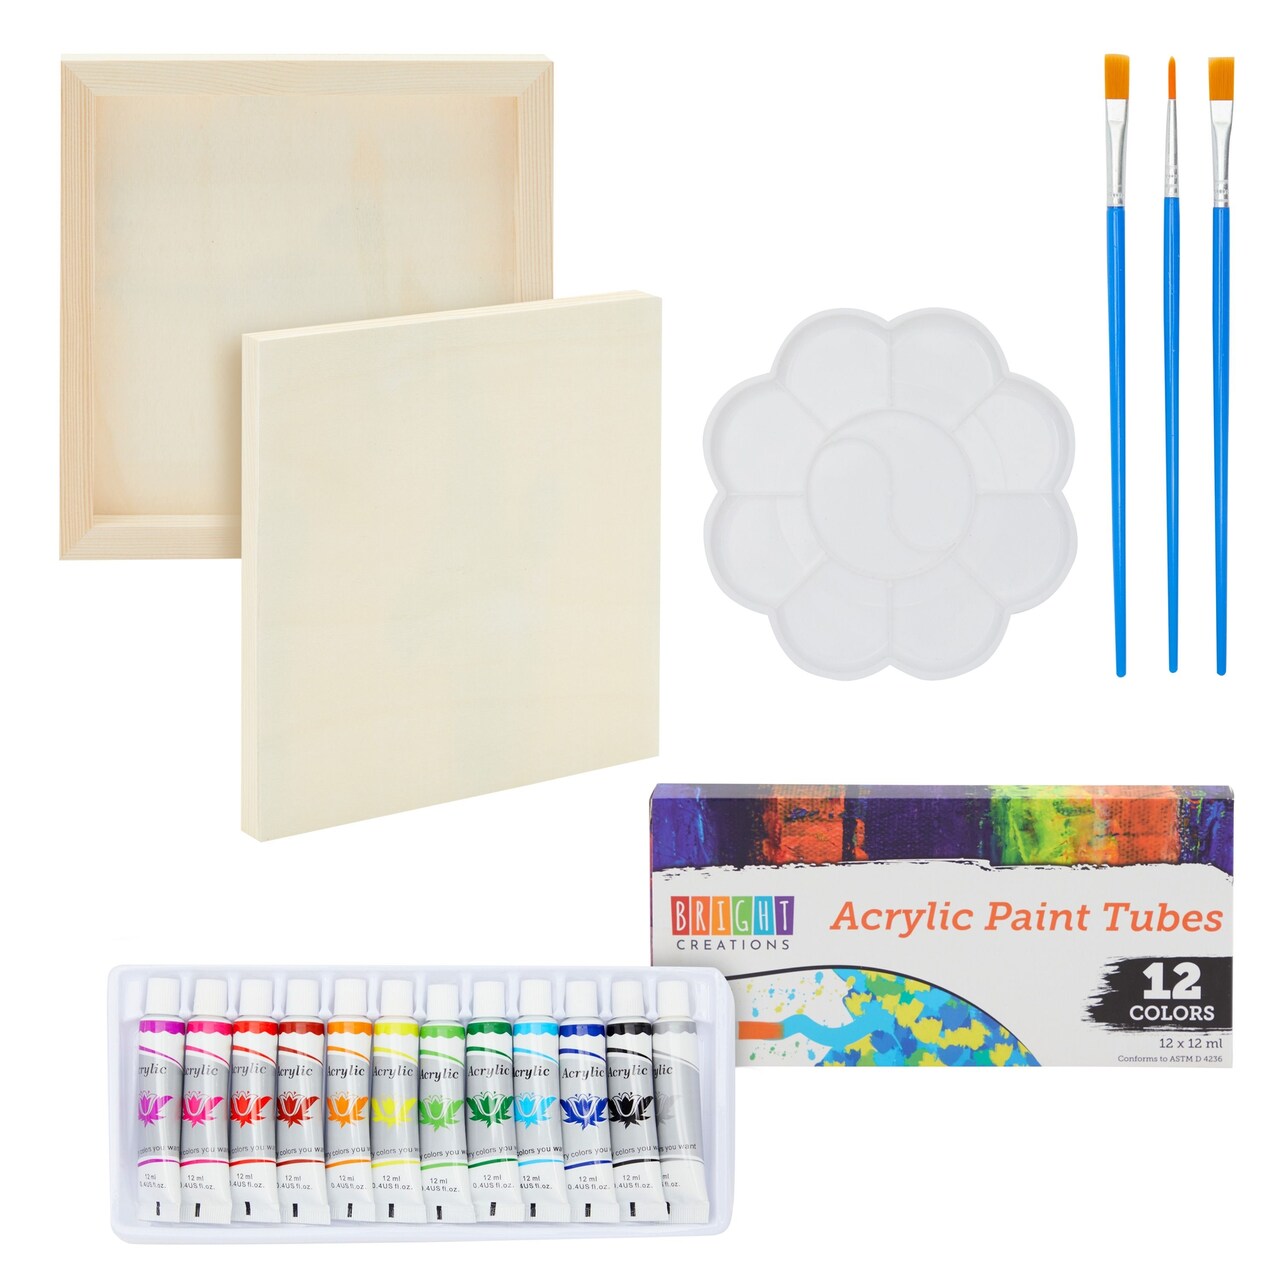 18 Piece 8x8 Canvas Painting Set with 12 Acrylic Paint Tubes, 3